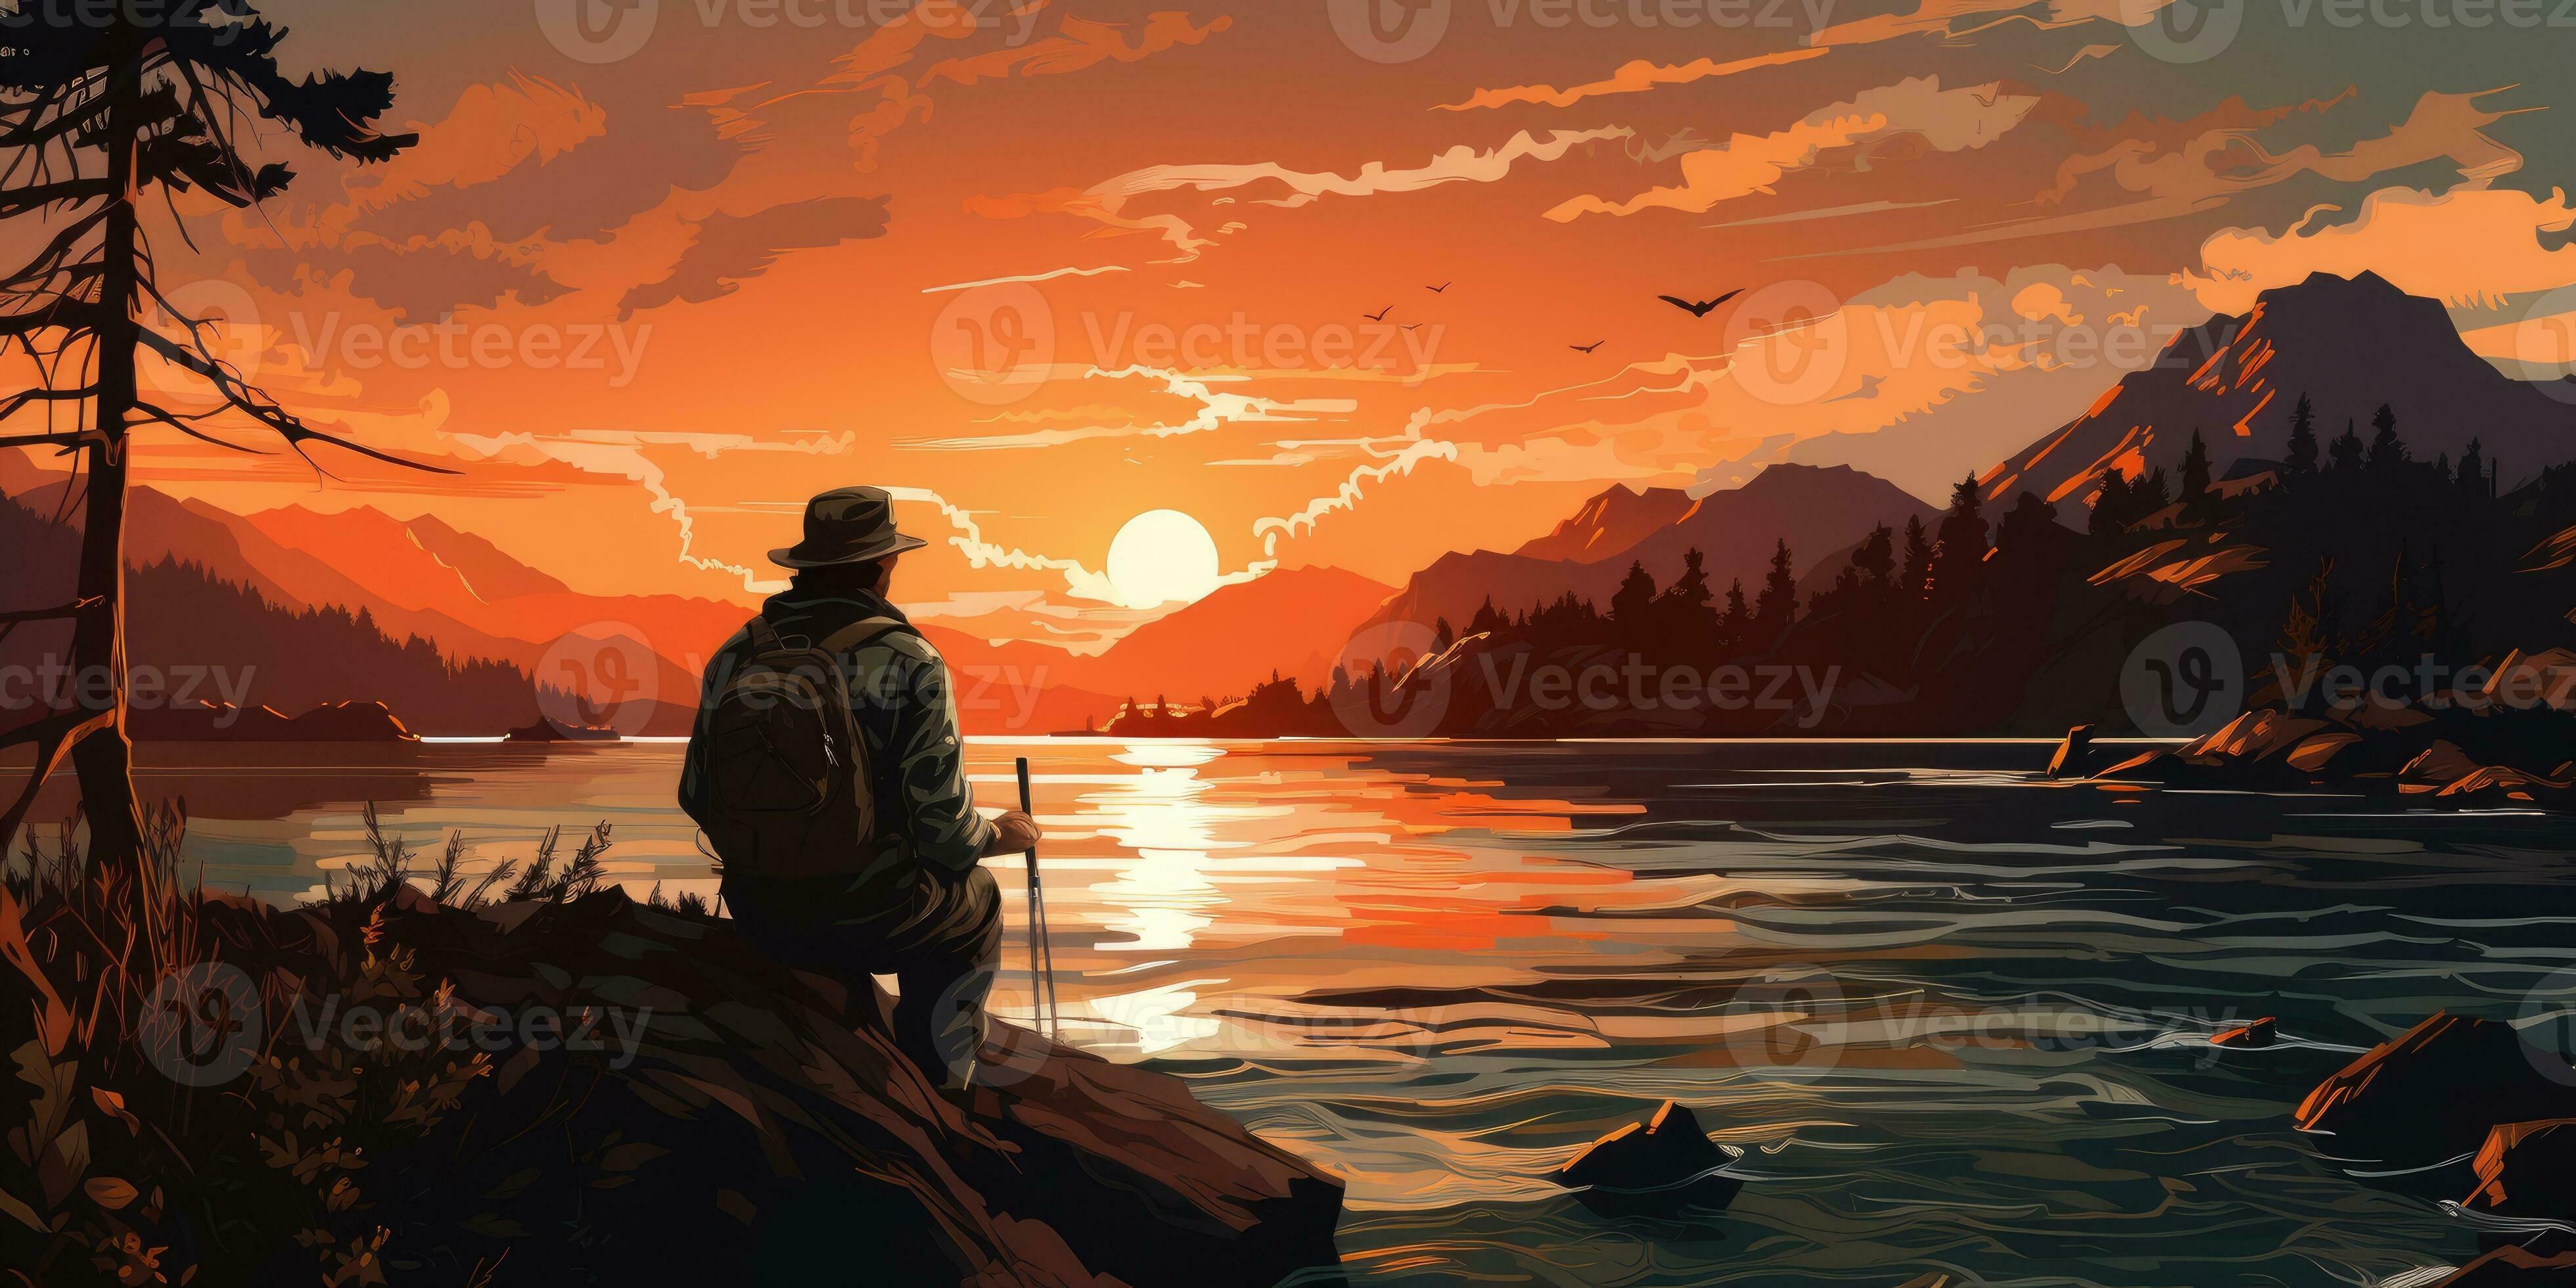 A man is fishing on the lake against the backdrop of sunset. The